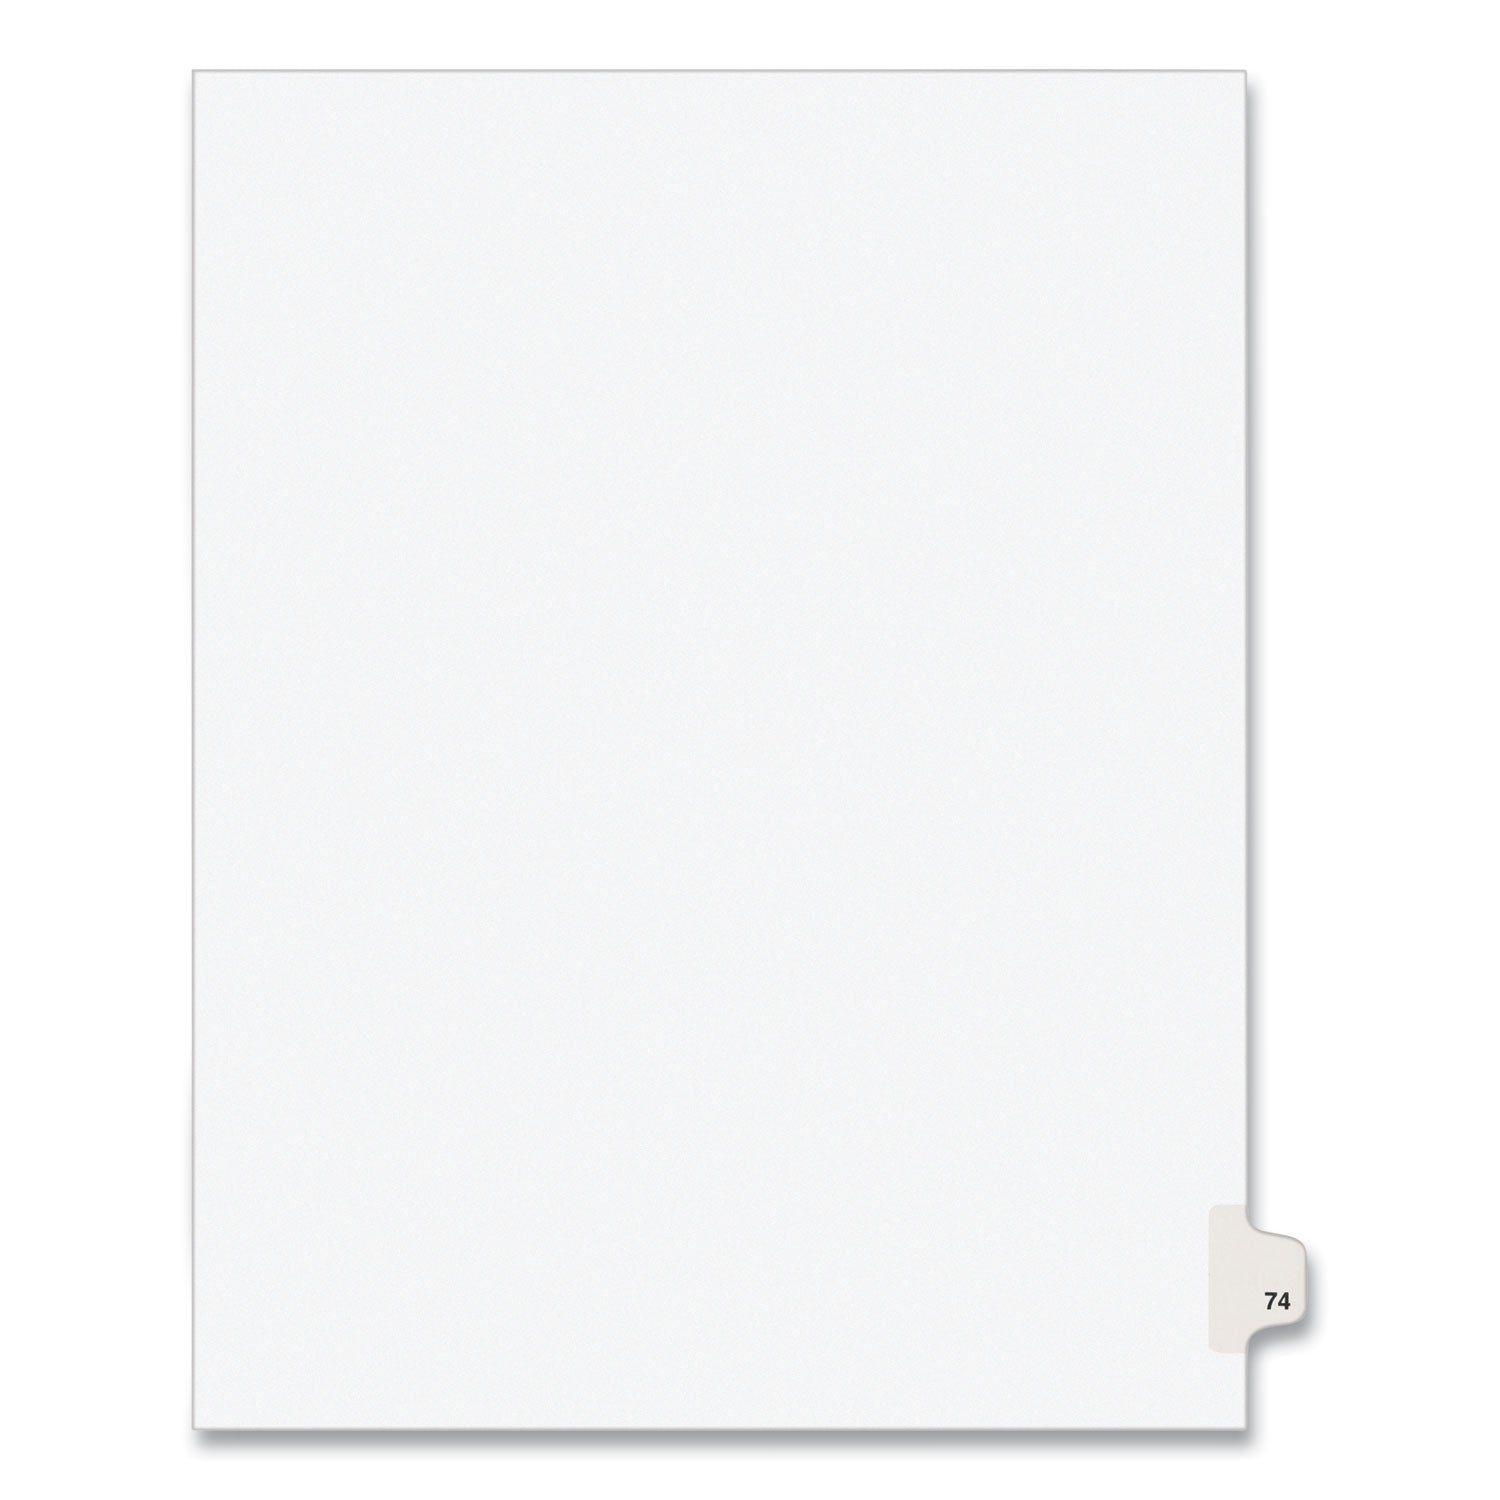 Preprinted Legal Exhibit Side Tab Index Dividers, Avery Style, 10-Tab, 74, 11 x 8.5, White, 25/Pack, (1074) - 